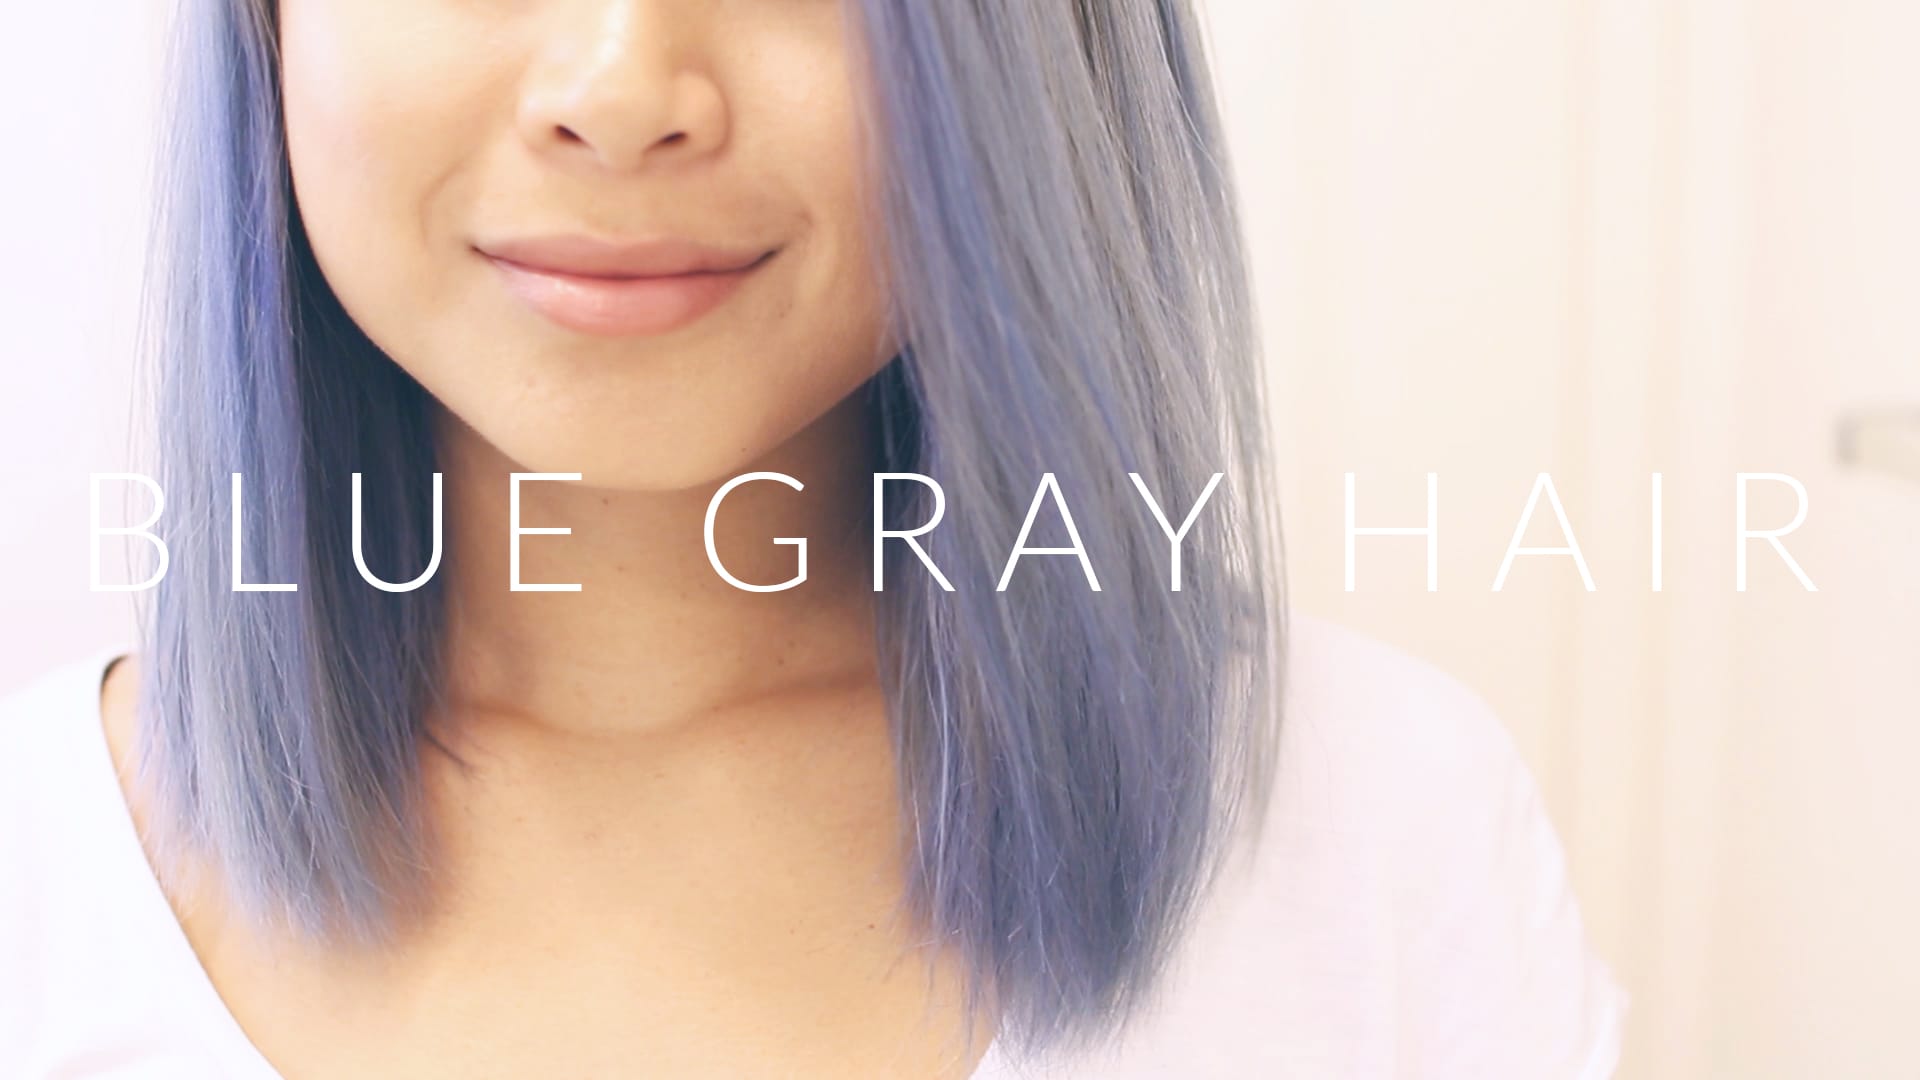 Blue Gray Hair for Dark Hair: How to Achieve the Look - wide 3